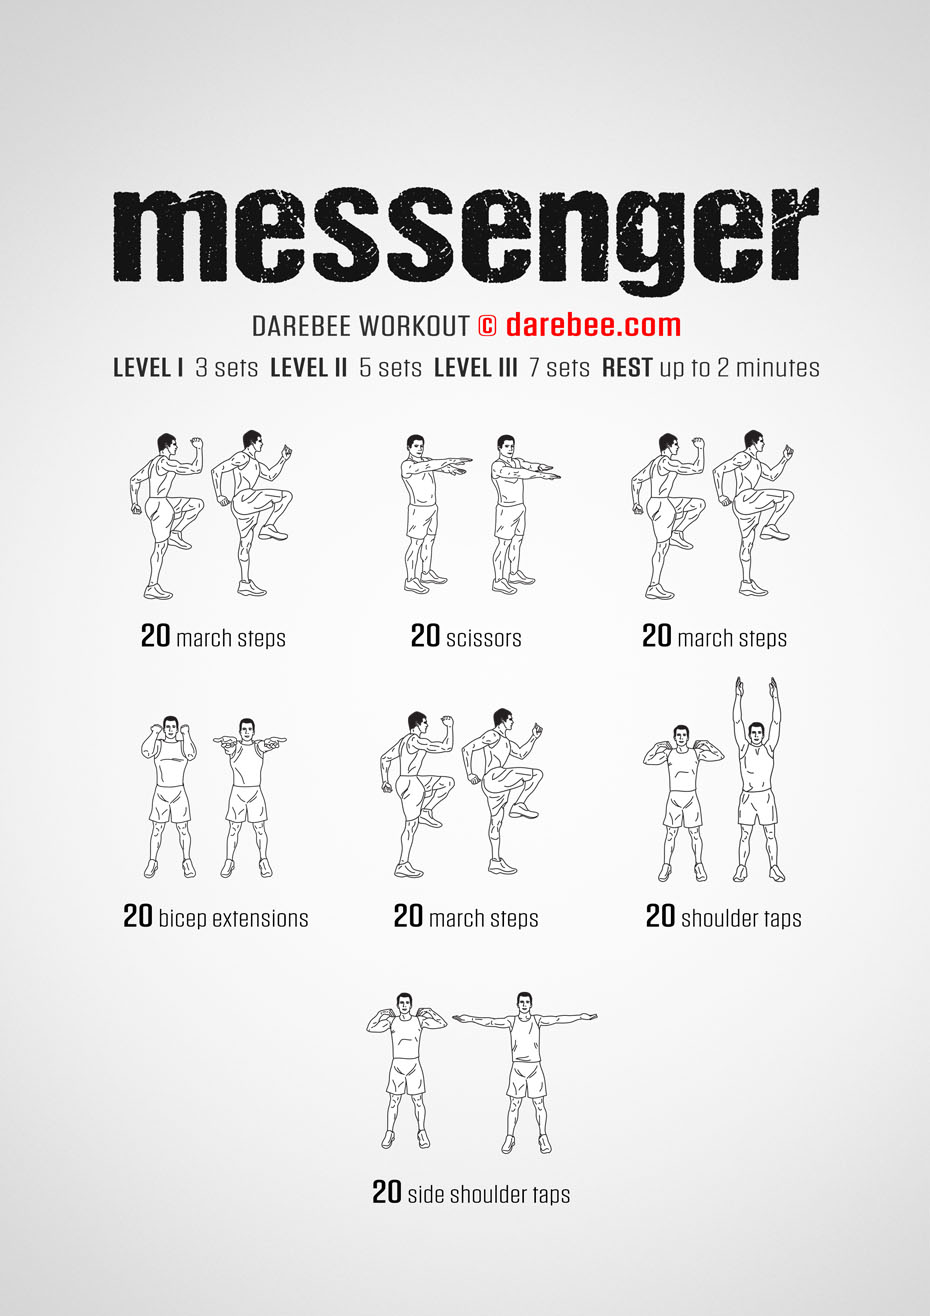 Messenger is a Darebee home fitness total-body strength workout